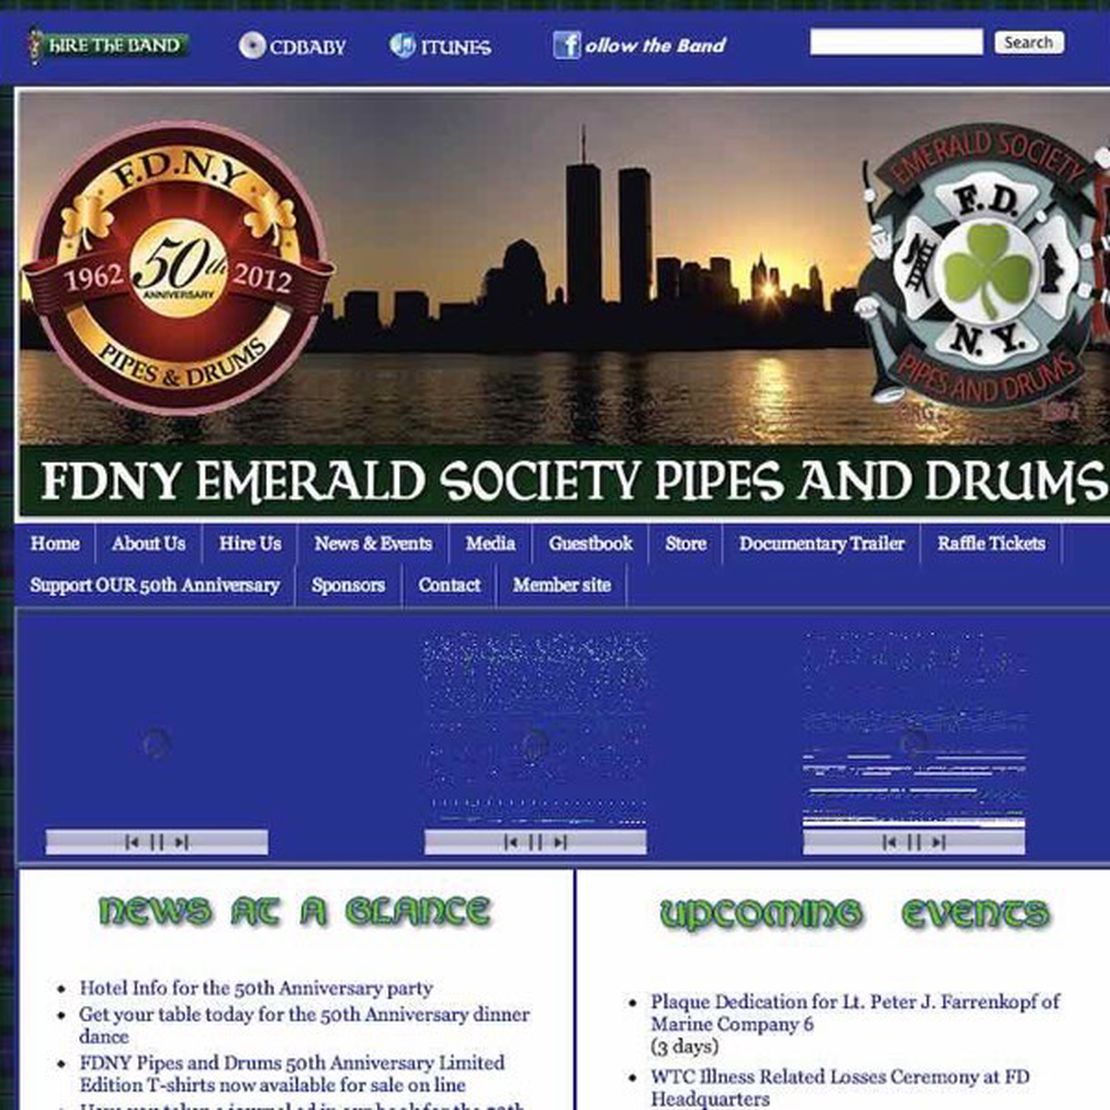 FDNY emerald society pipes and drums inc.